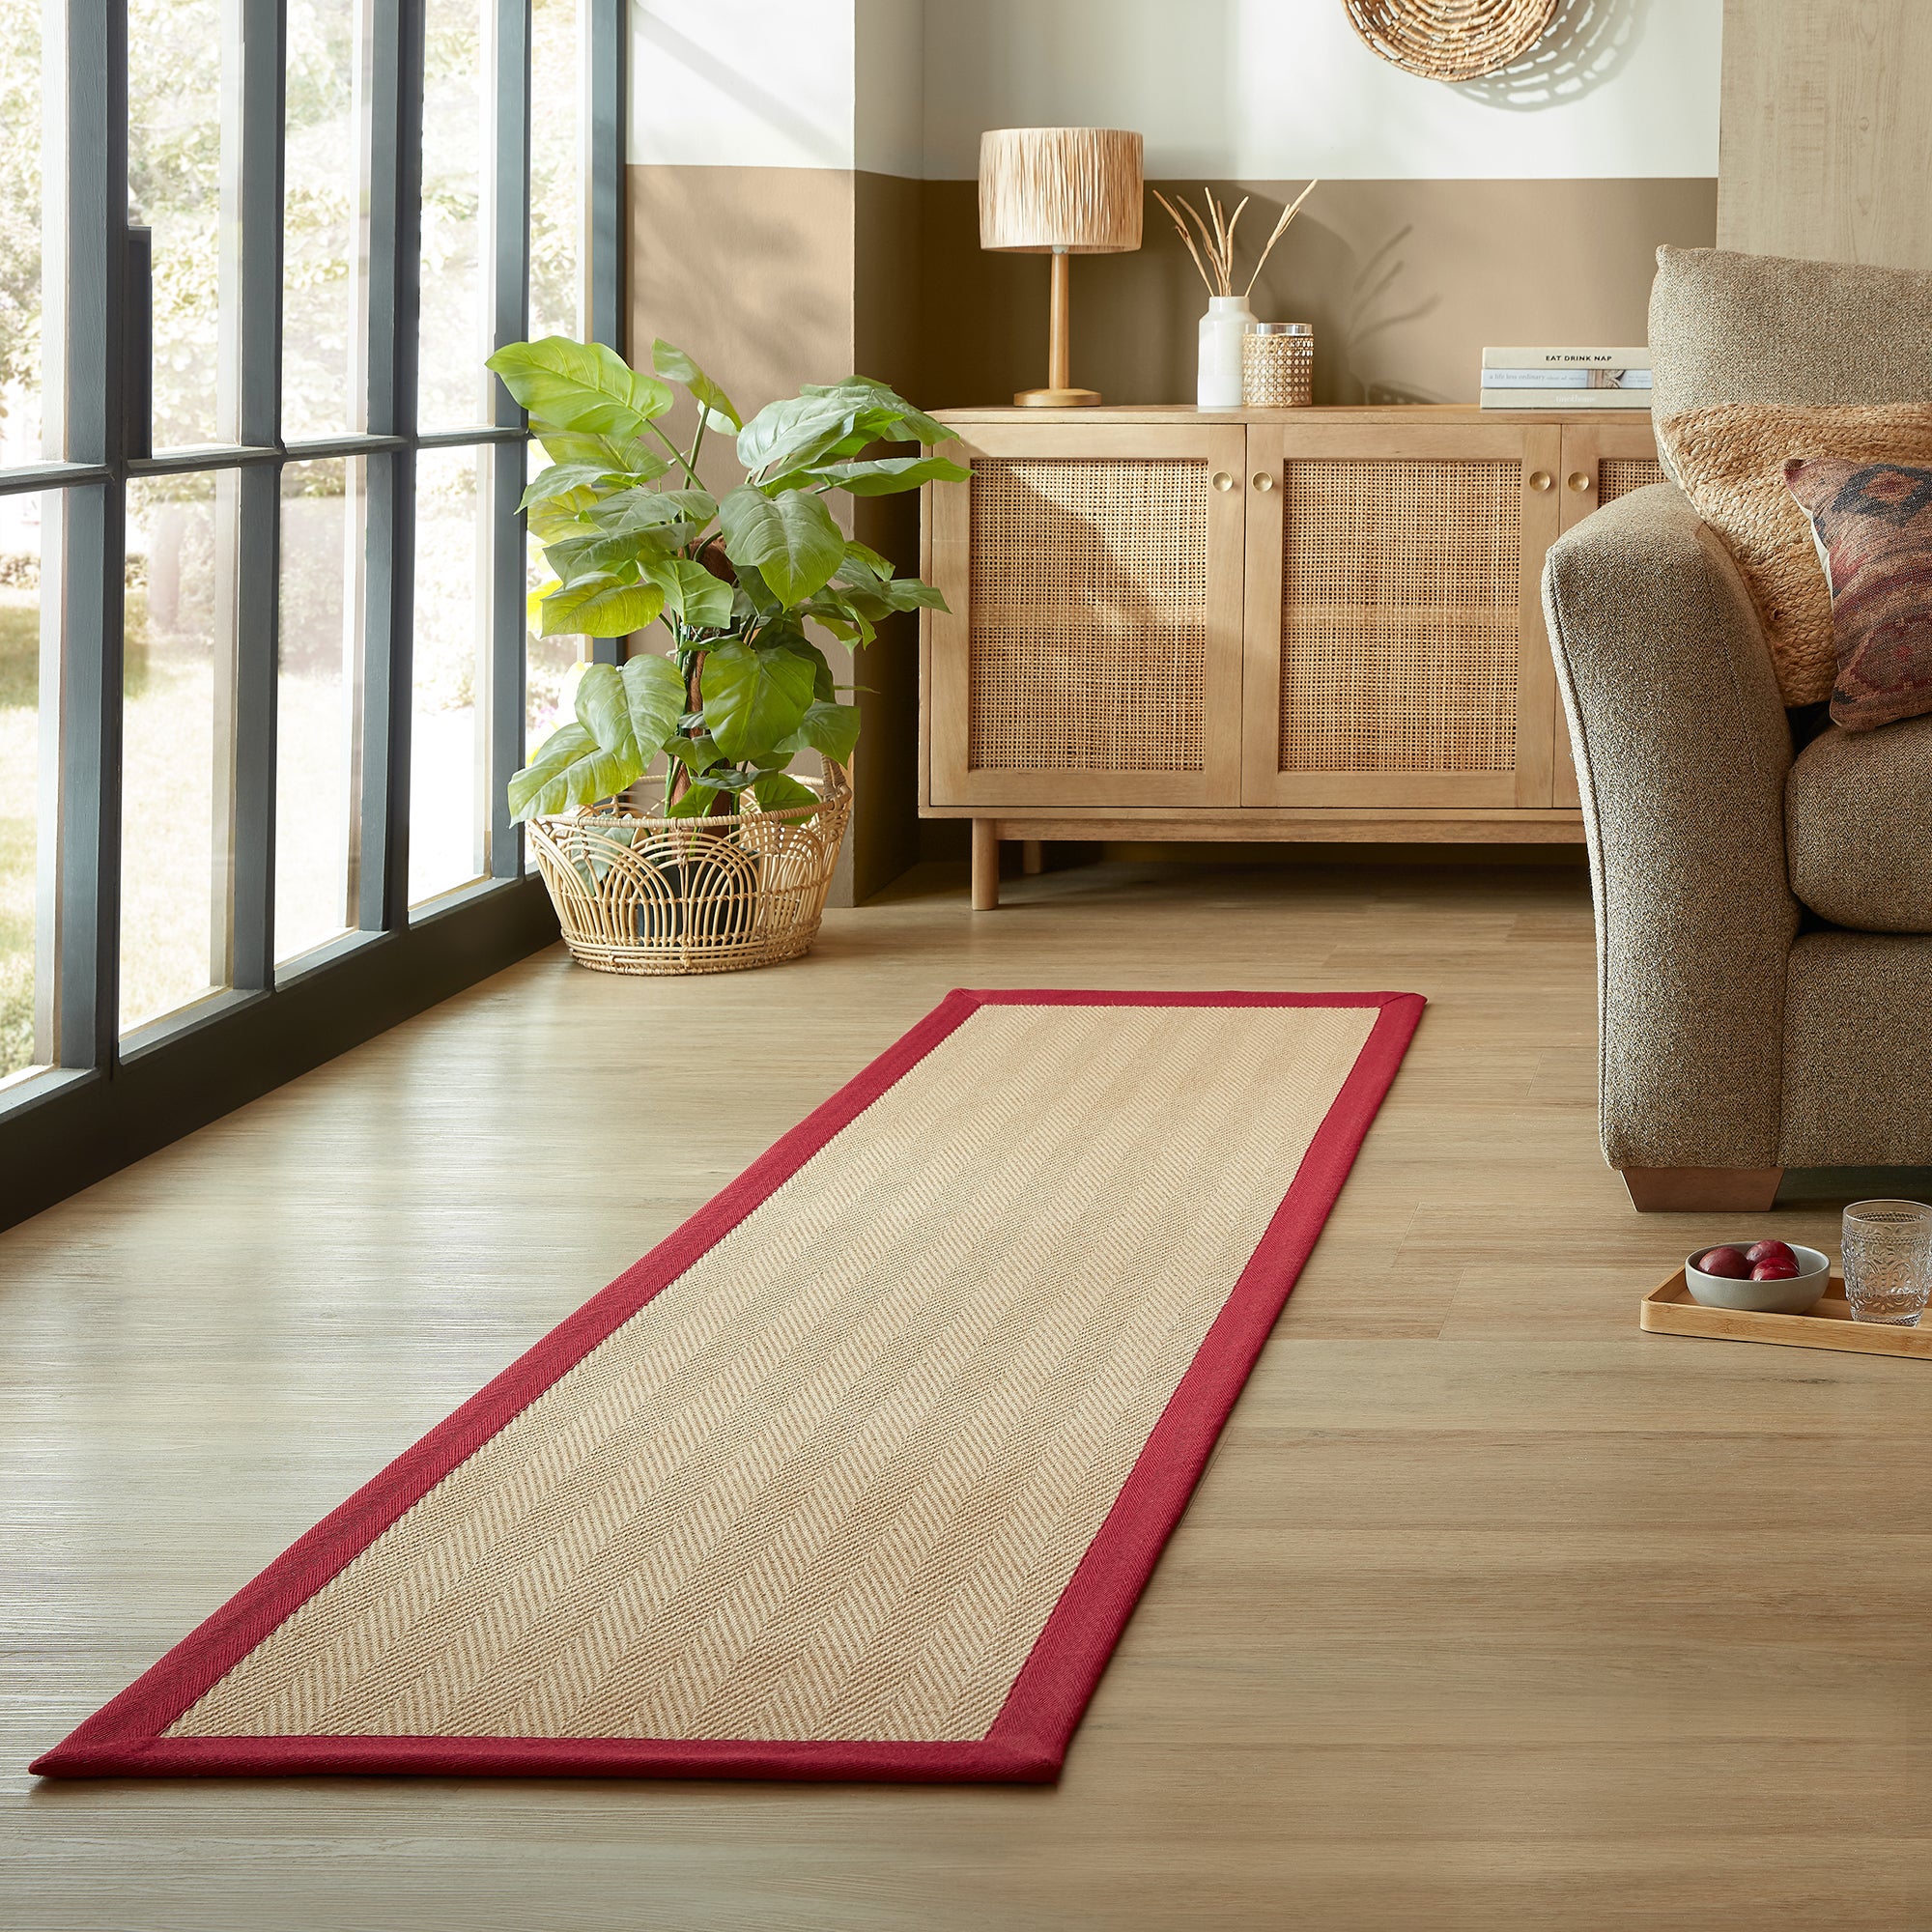 Hallway Runners, Hall Rugs & Runners for Your Home